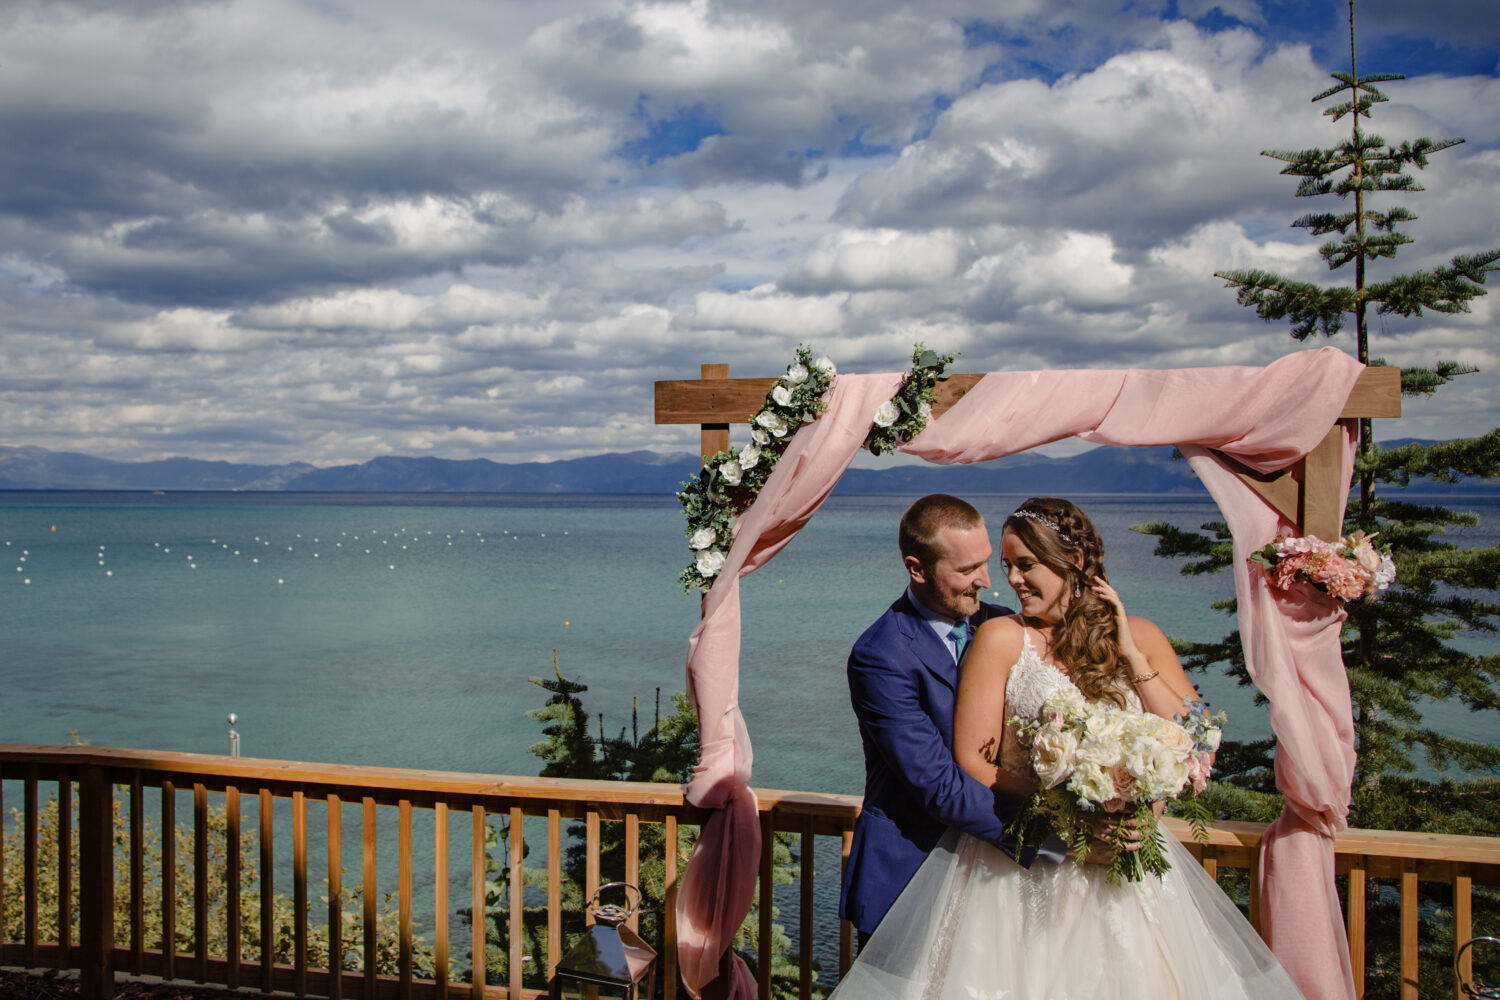 Lakeside portrait of the couple under their DIY wooden wedding arch.